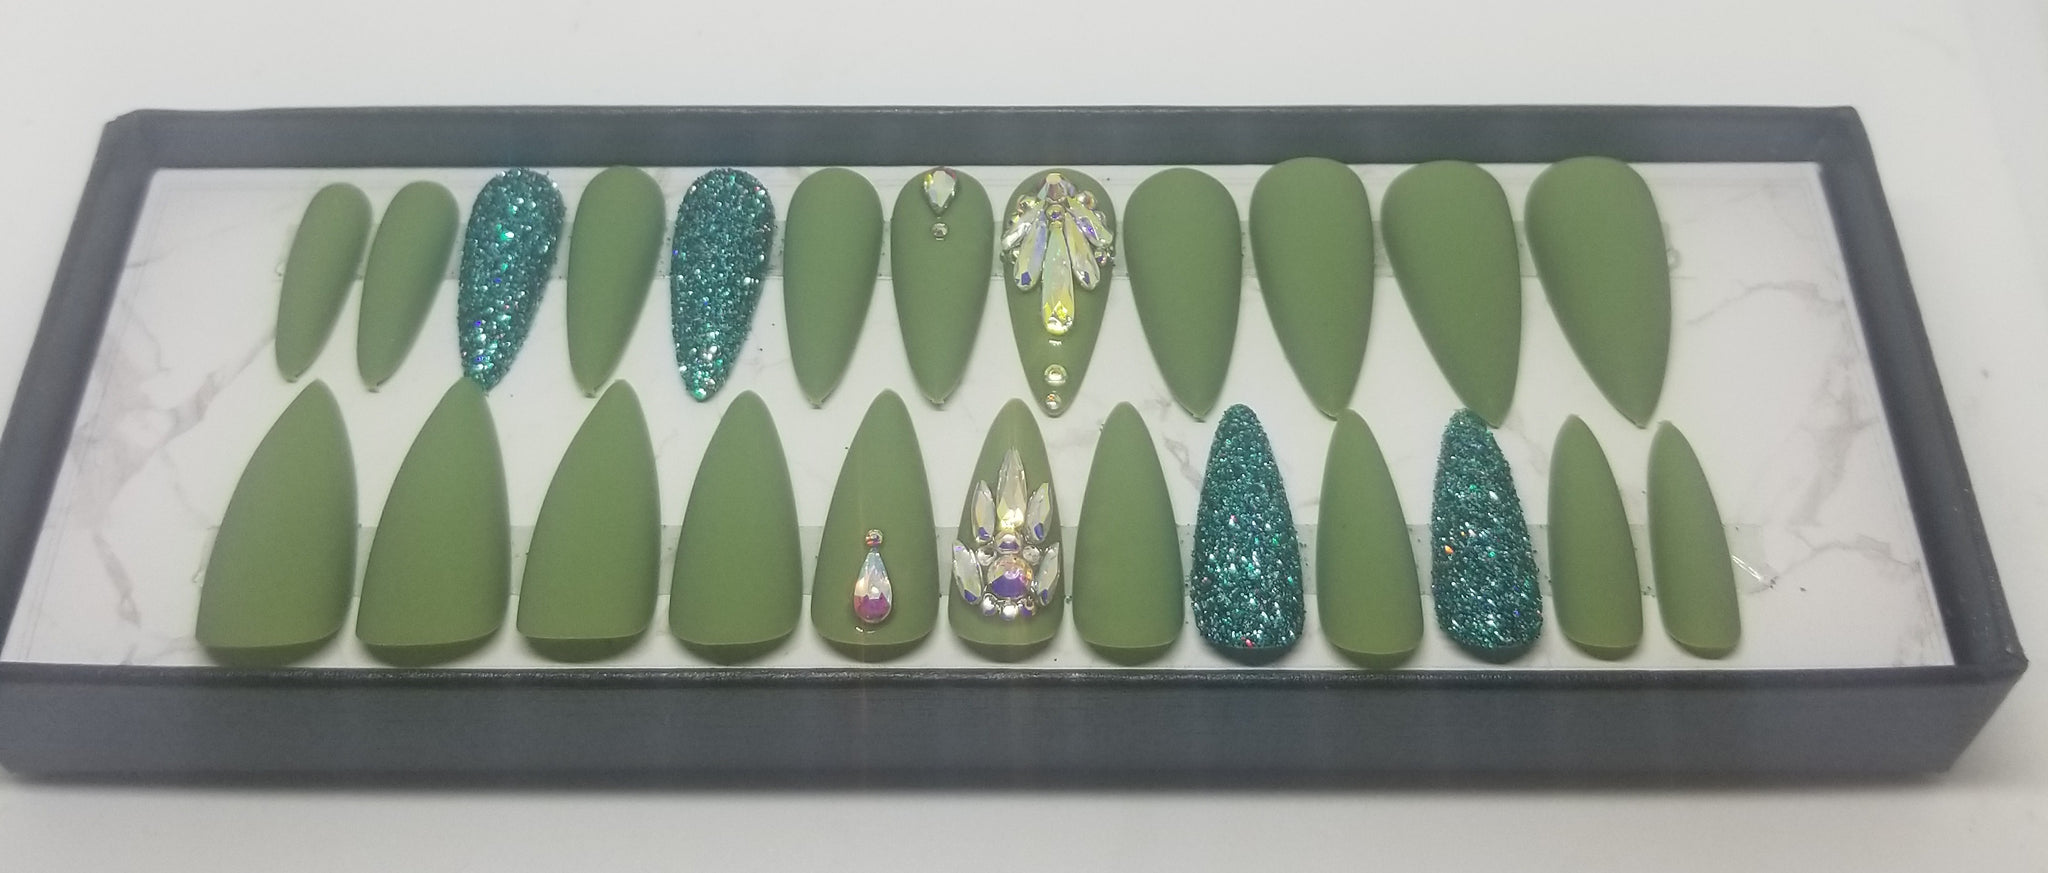 Green Queen Press-On Nails